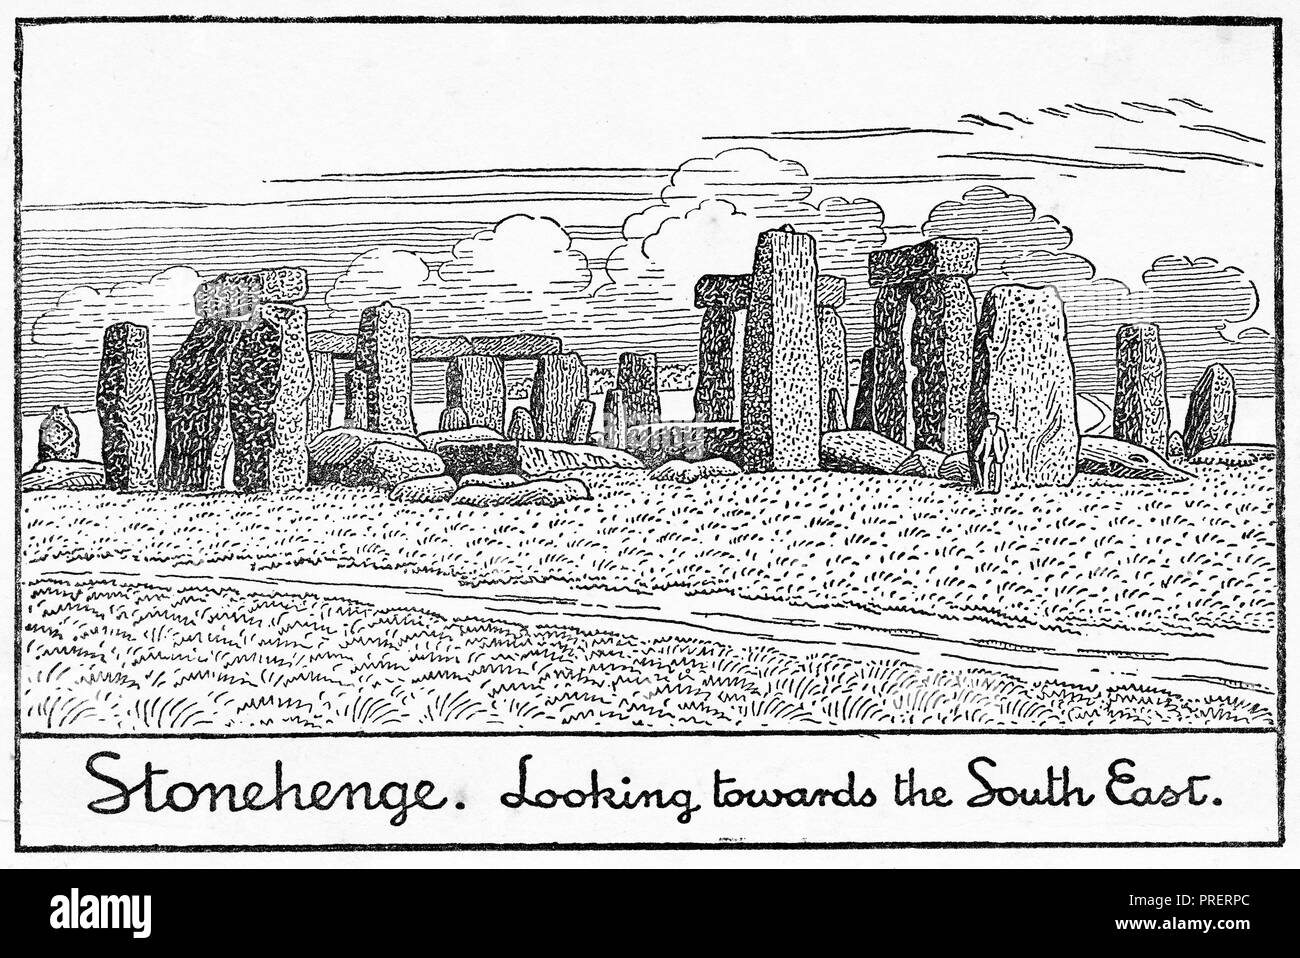 Engraving of stonehenge, looking towards the south east. From Stonehenge Today and Yesterday, 1916 Stock Photo